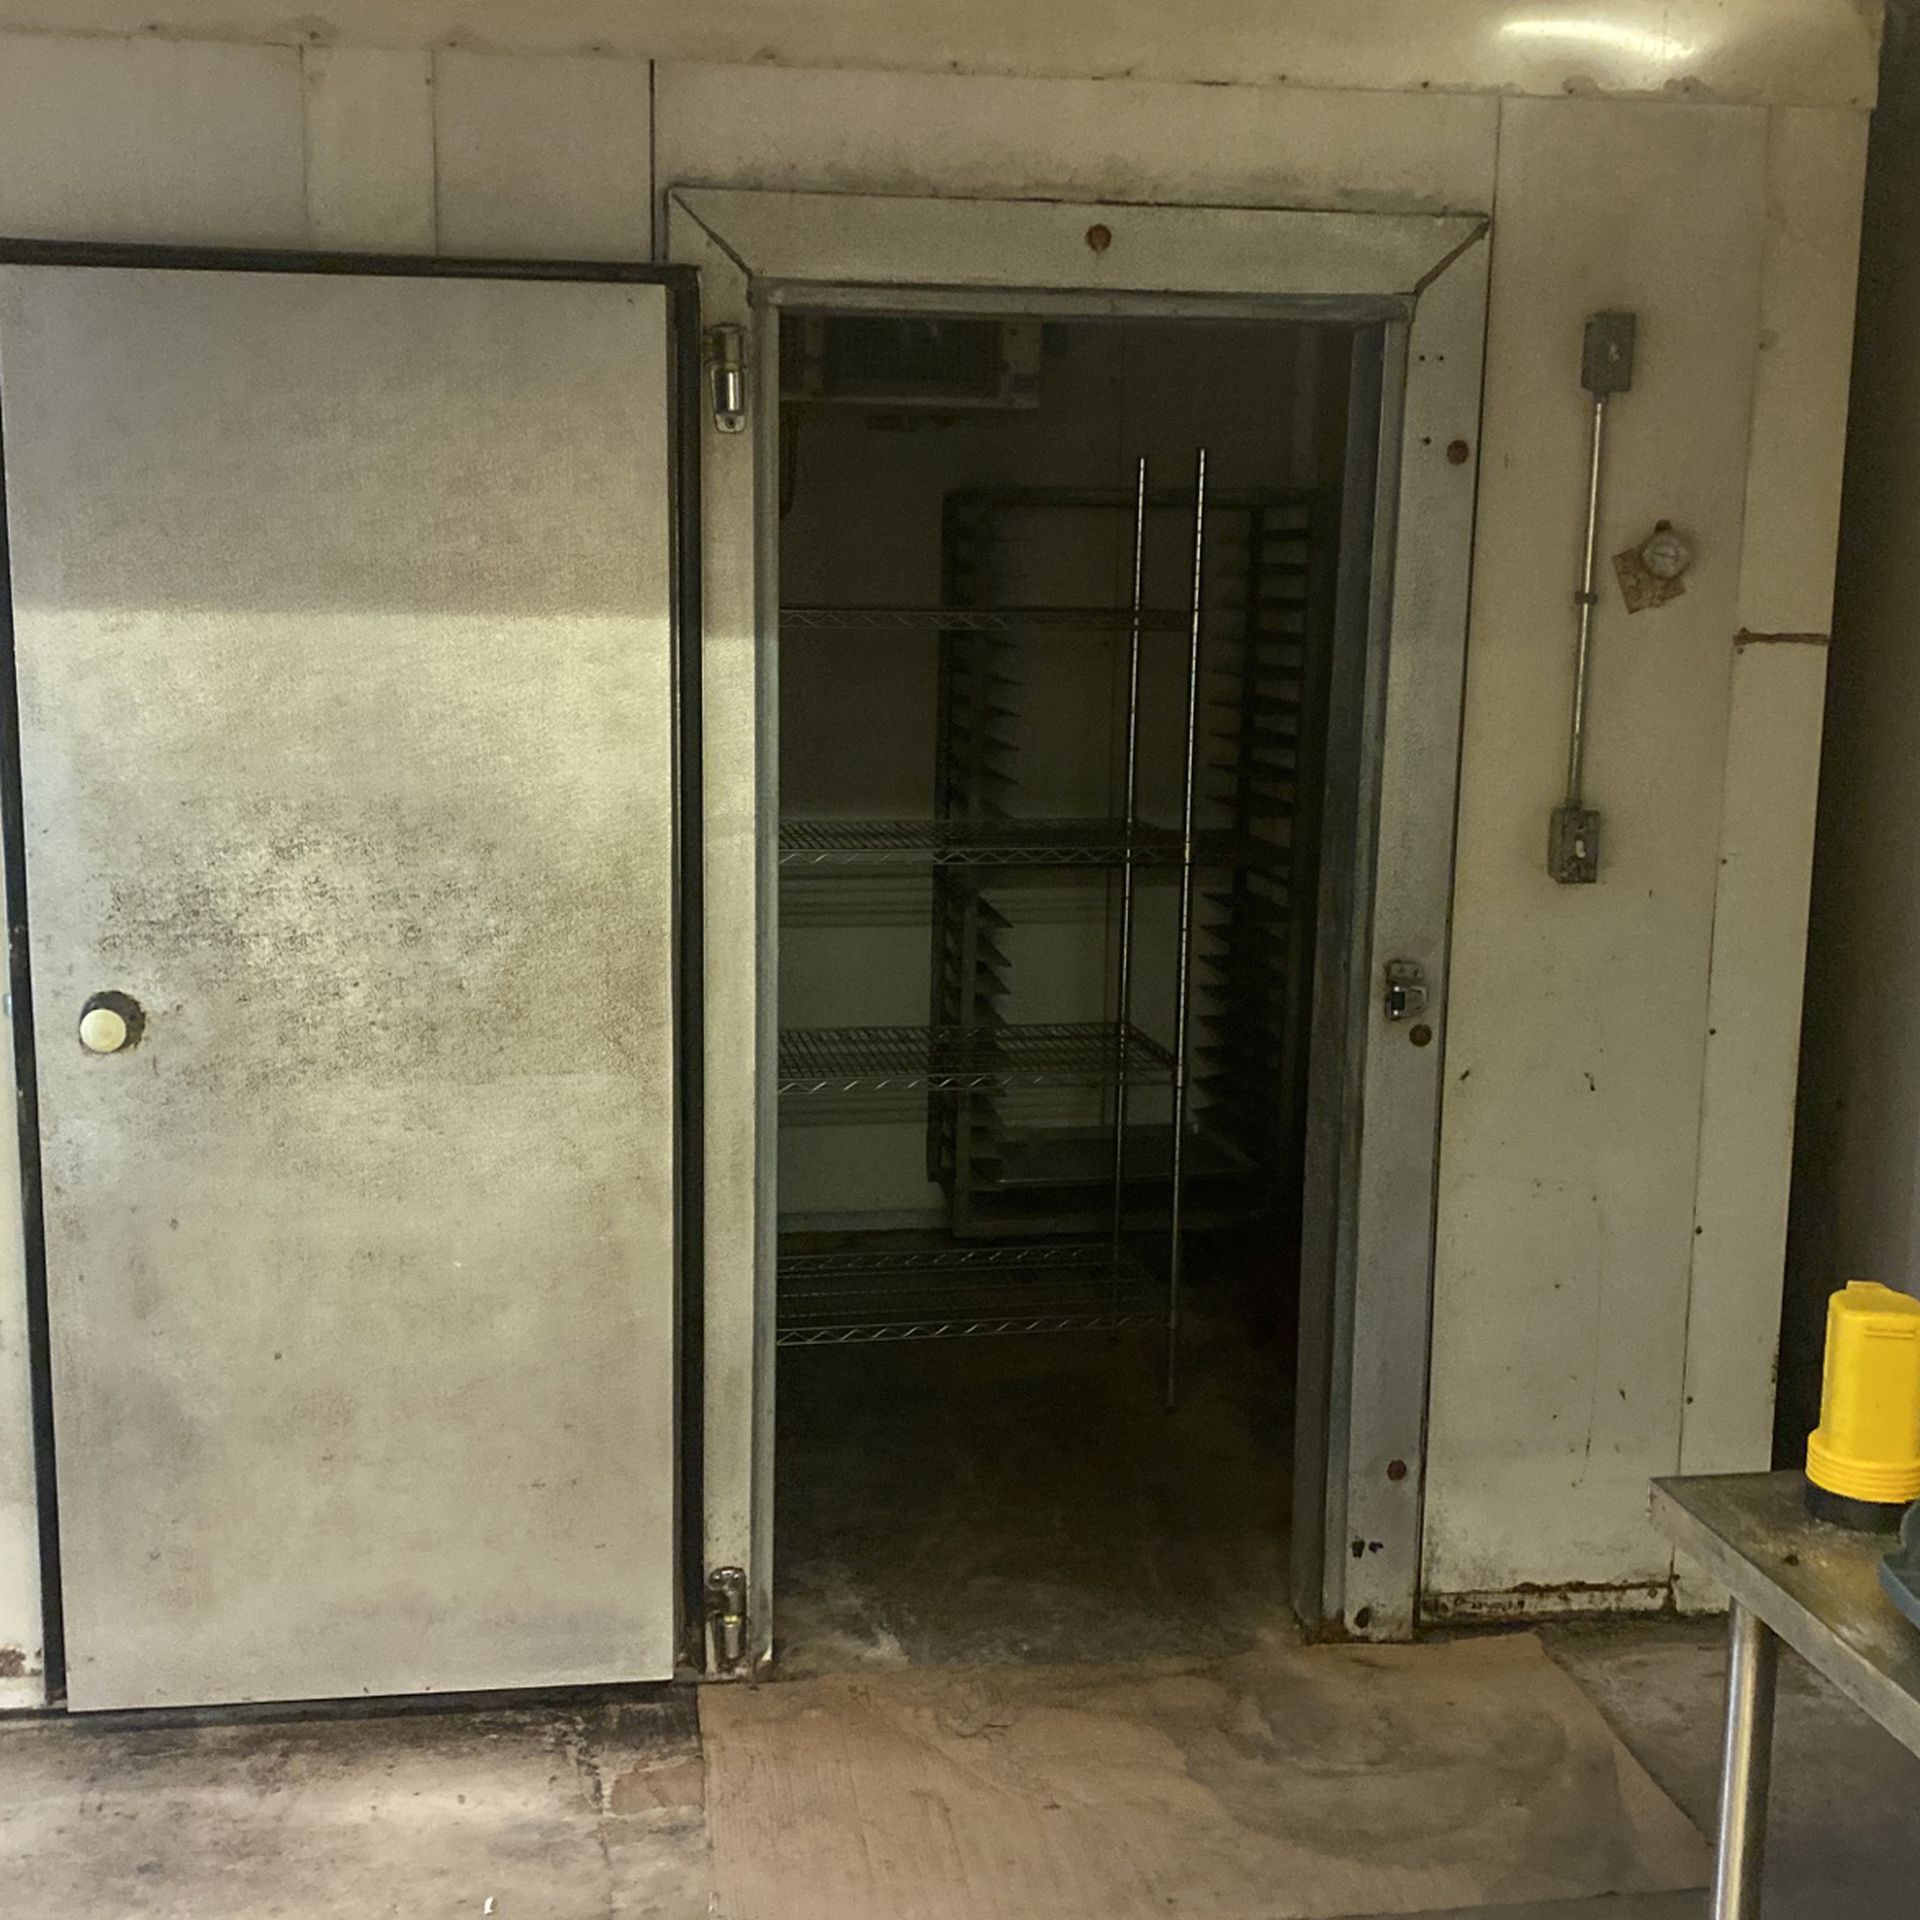 I Have Walk In Freezer And Walk In Cooler Call For Details (contact info removed)